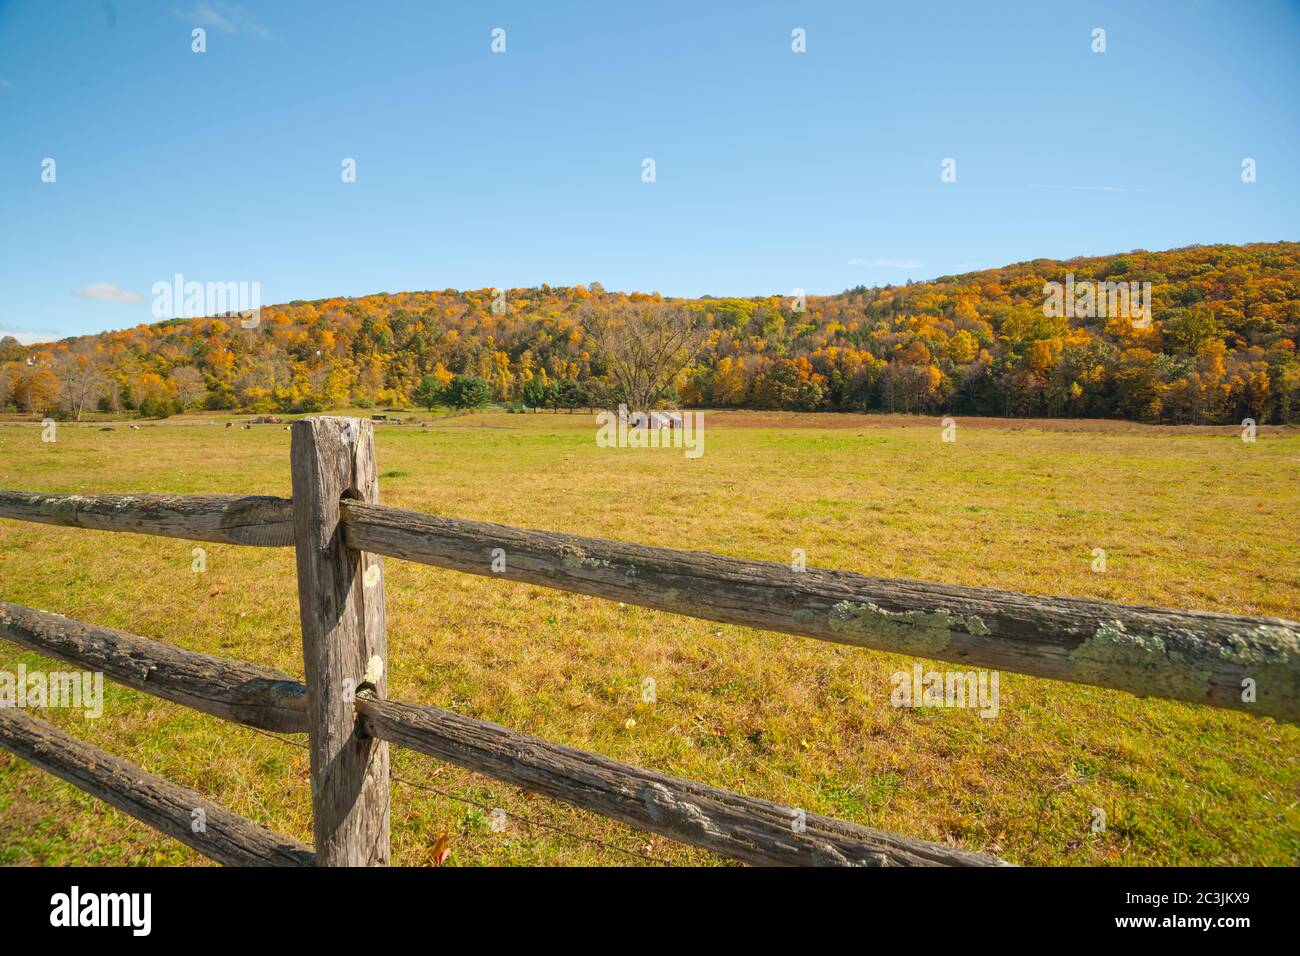 From American country road a rural landscape with farmhouse in distance beyond rustic post and rail fence in Kent county, New England USA. Stock Photo